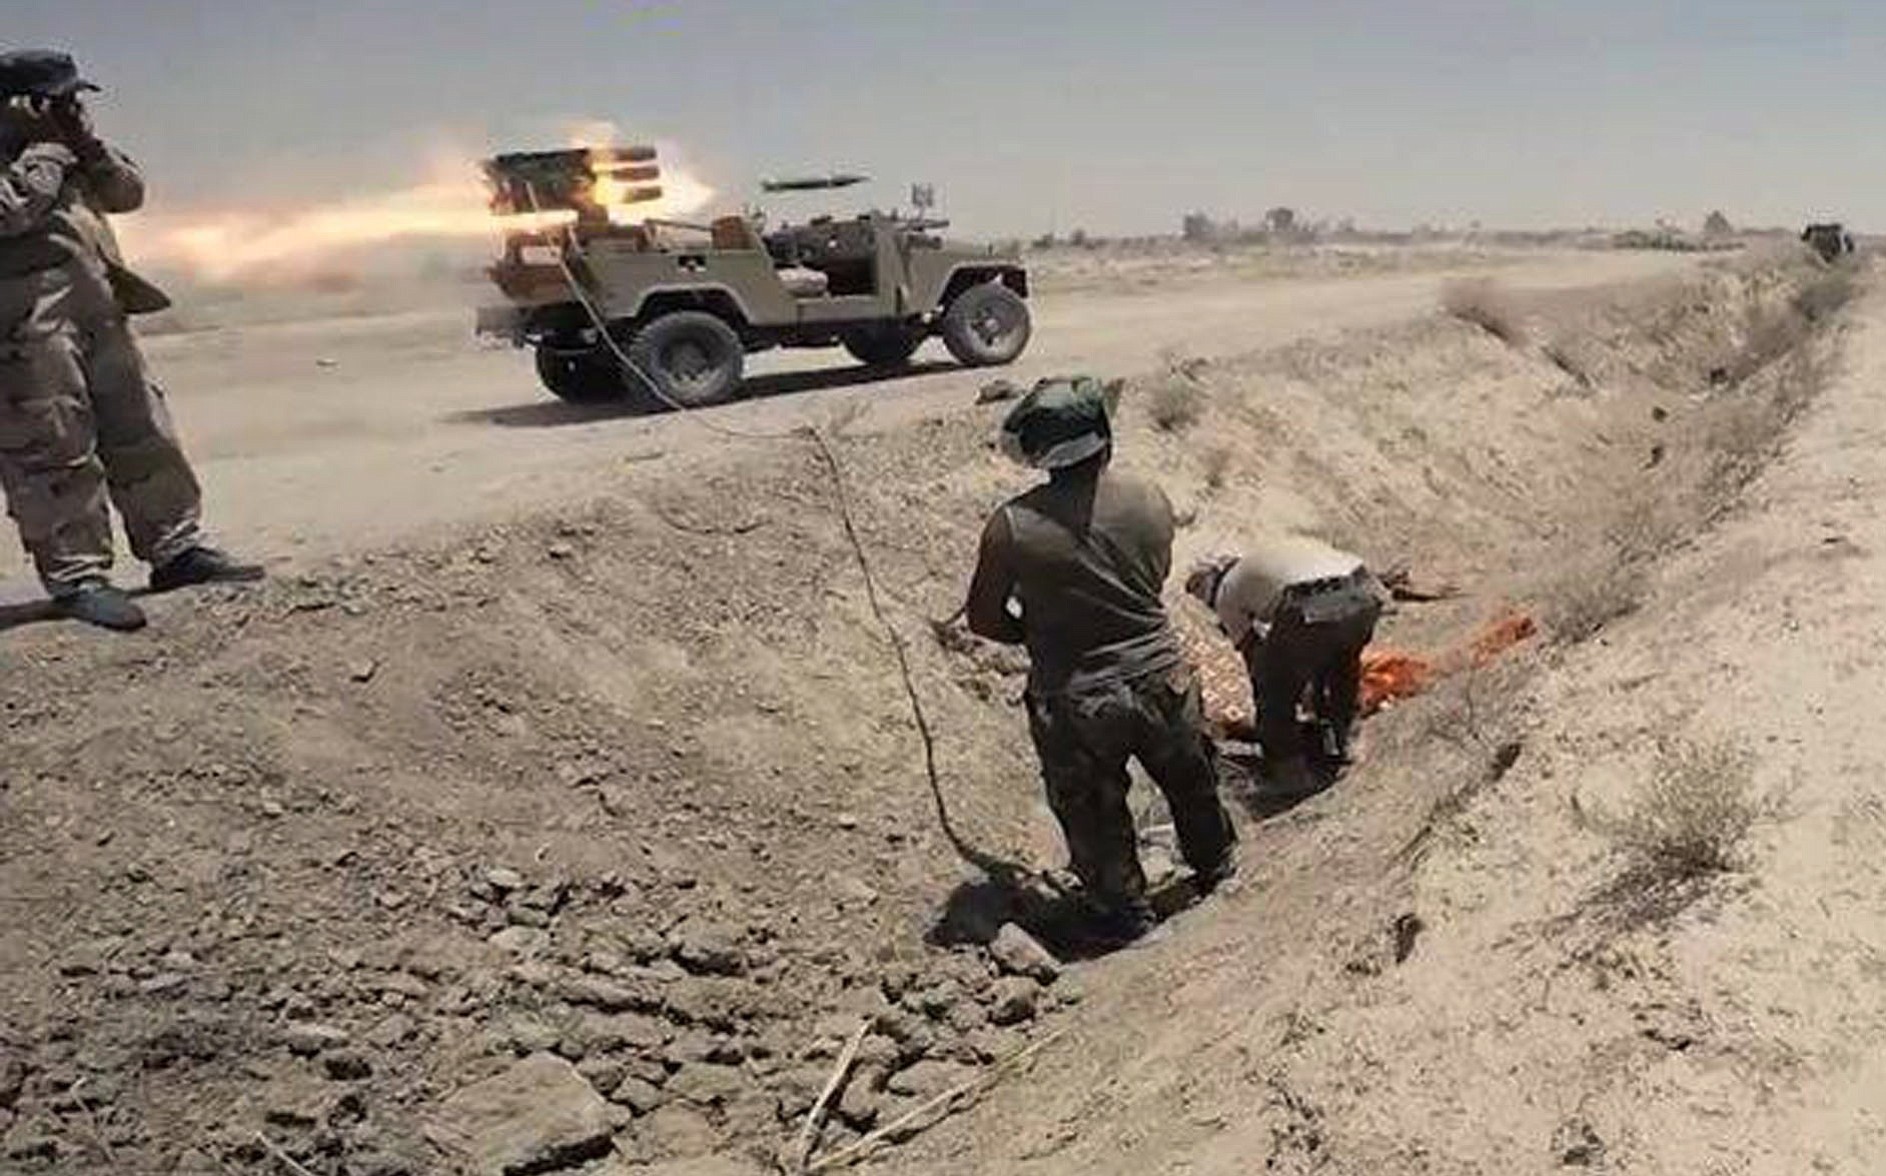 Iraqi security forces and allied Shiite militiamen launch rockets against Islamic State extremist positions in Saqlawiyah near Fallujah, Iraq.